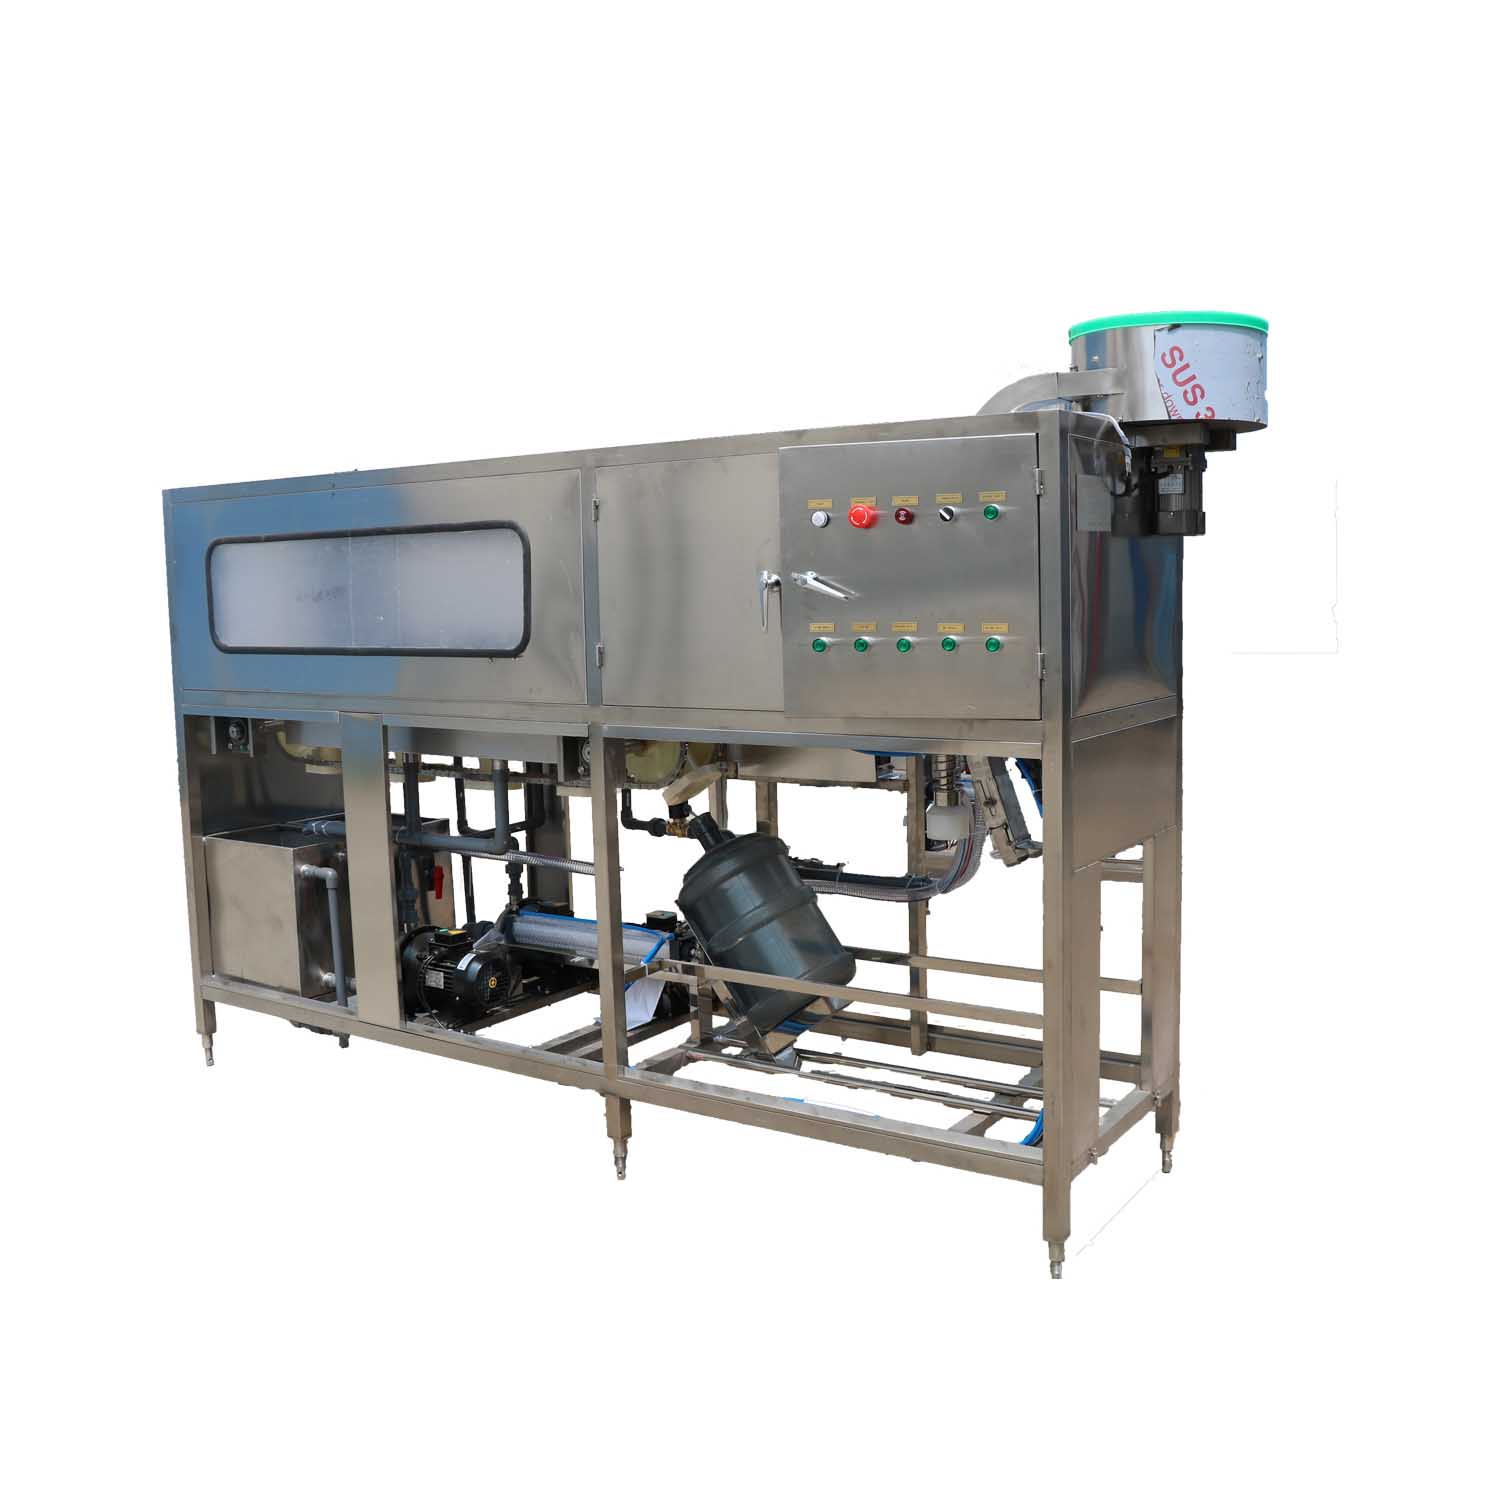 Introduction of filling equipment